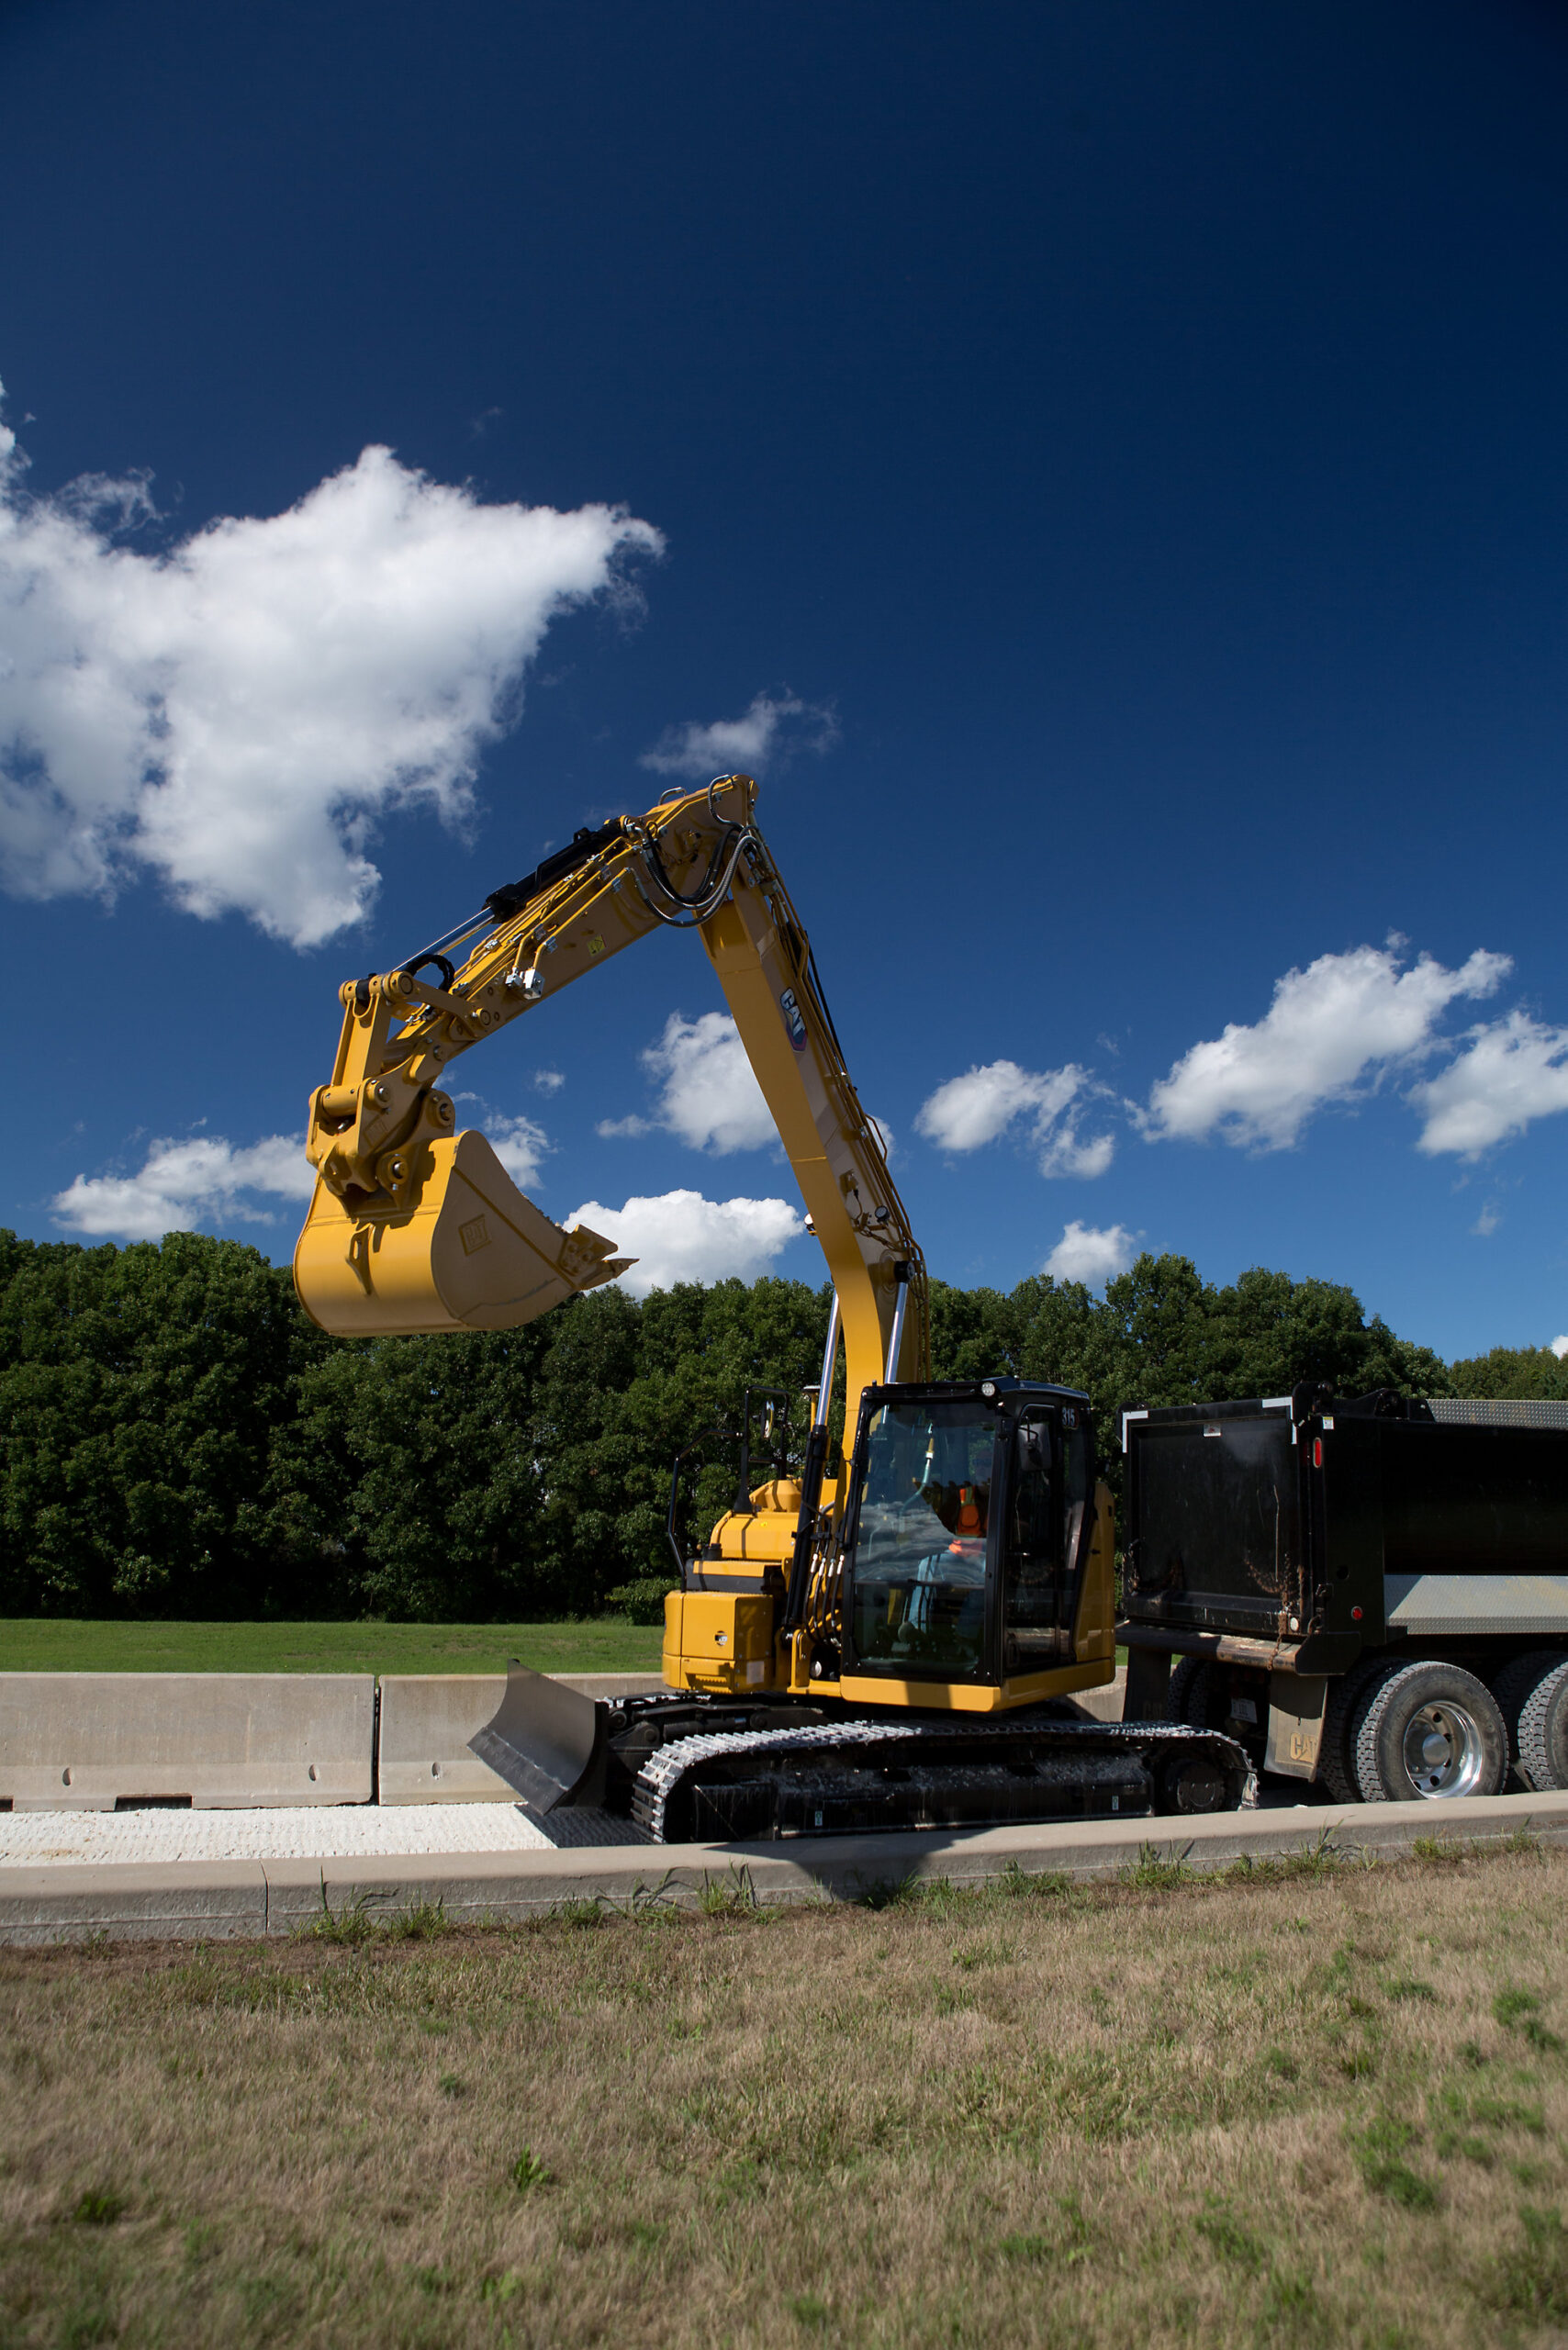 The new Cat 315 is the most productive Cat excavator in ...